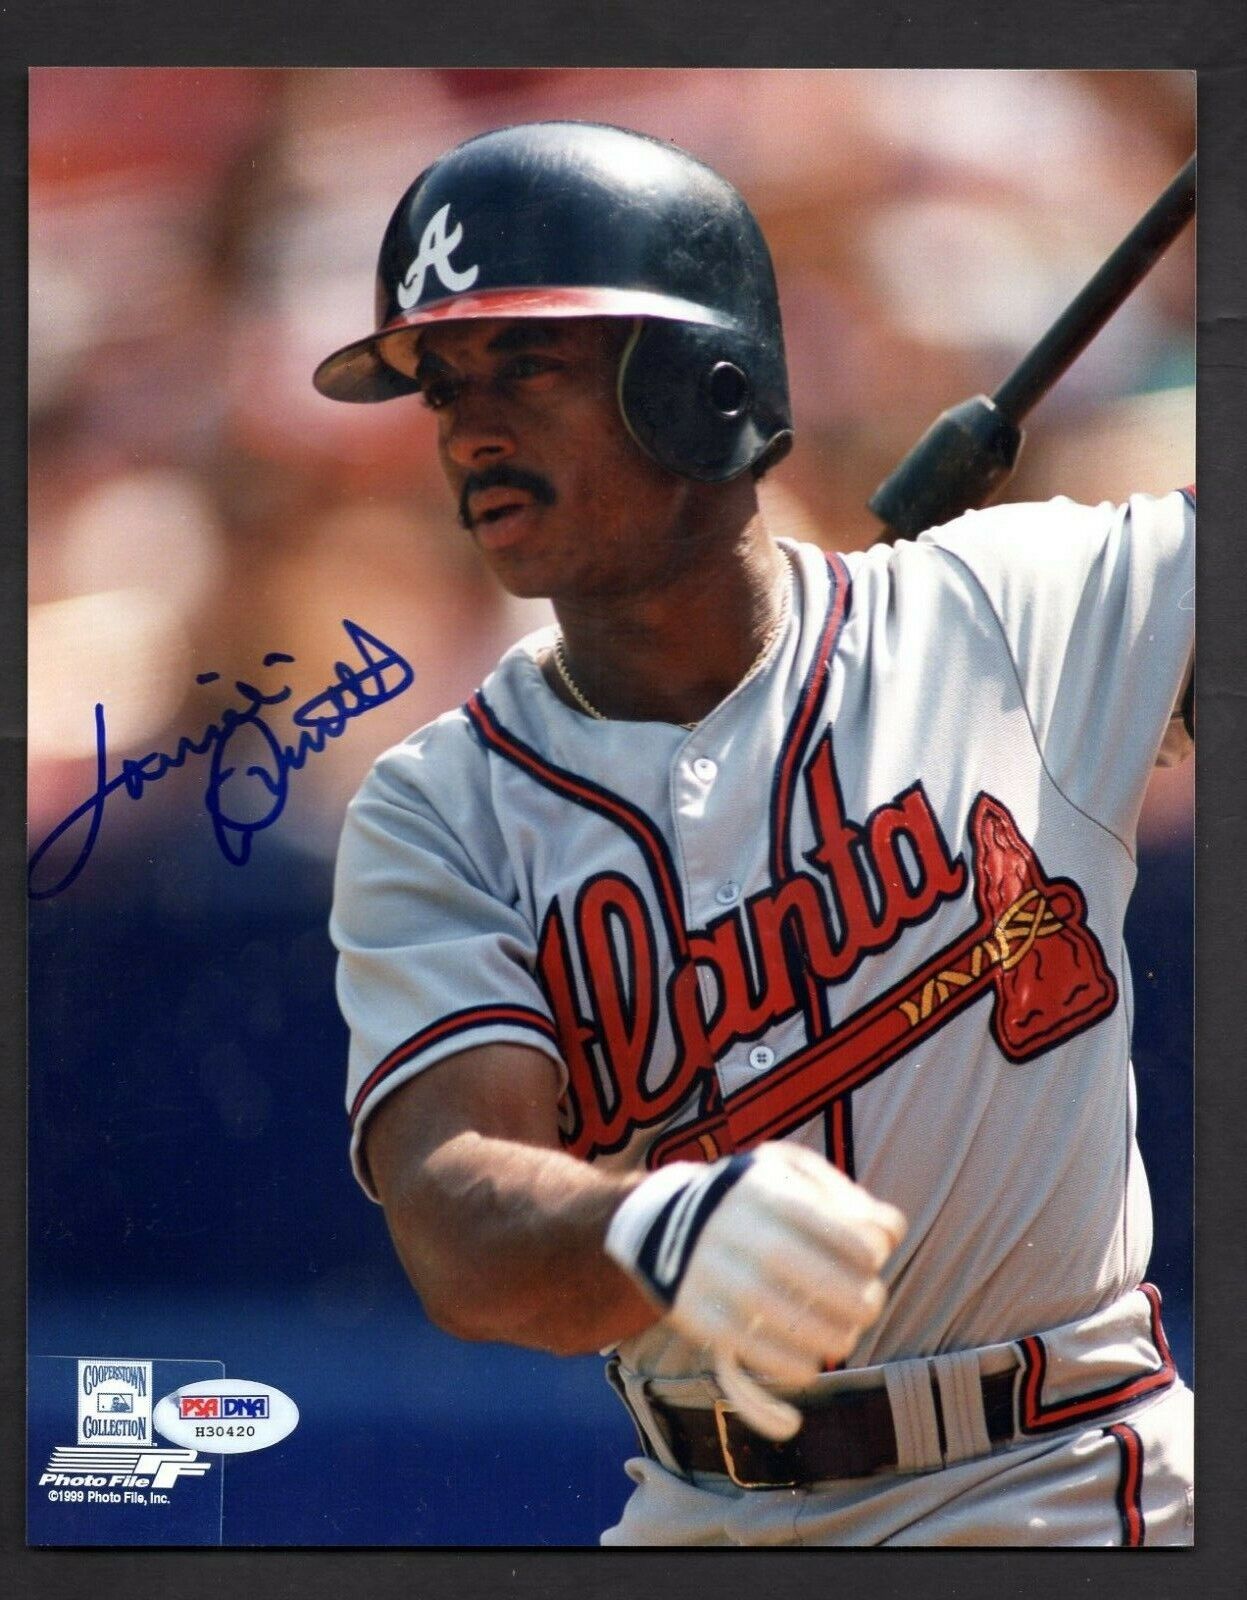 Lonnie Smith Signed 8 x 10 Photo Poster painting PSA/DNA Atlanta Braves SHIPPING IS